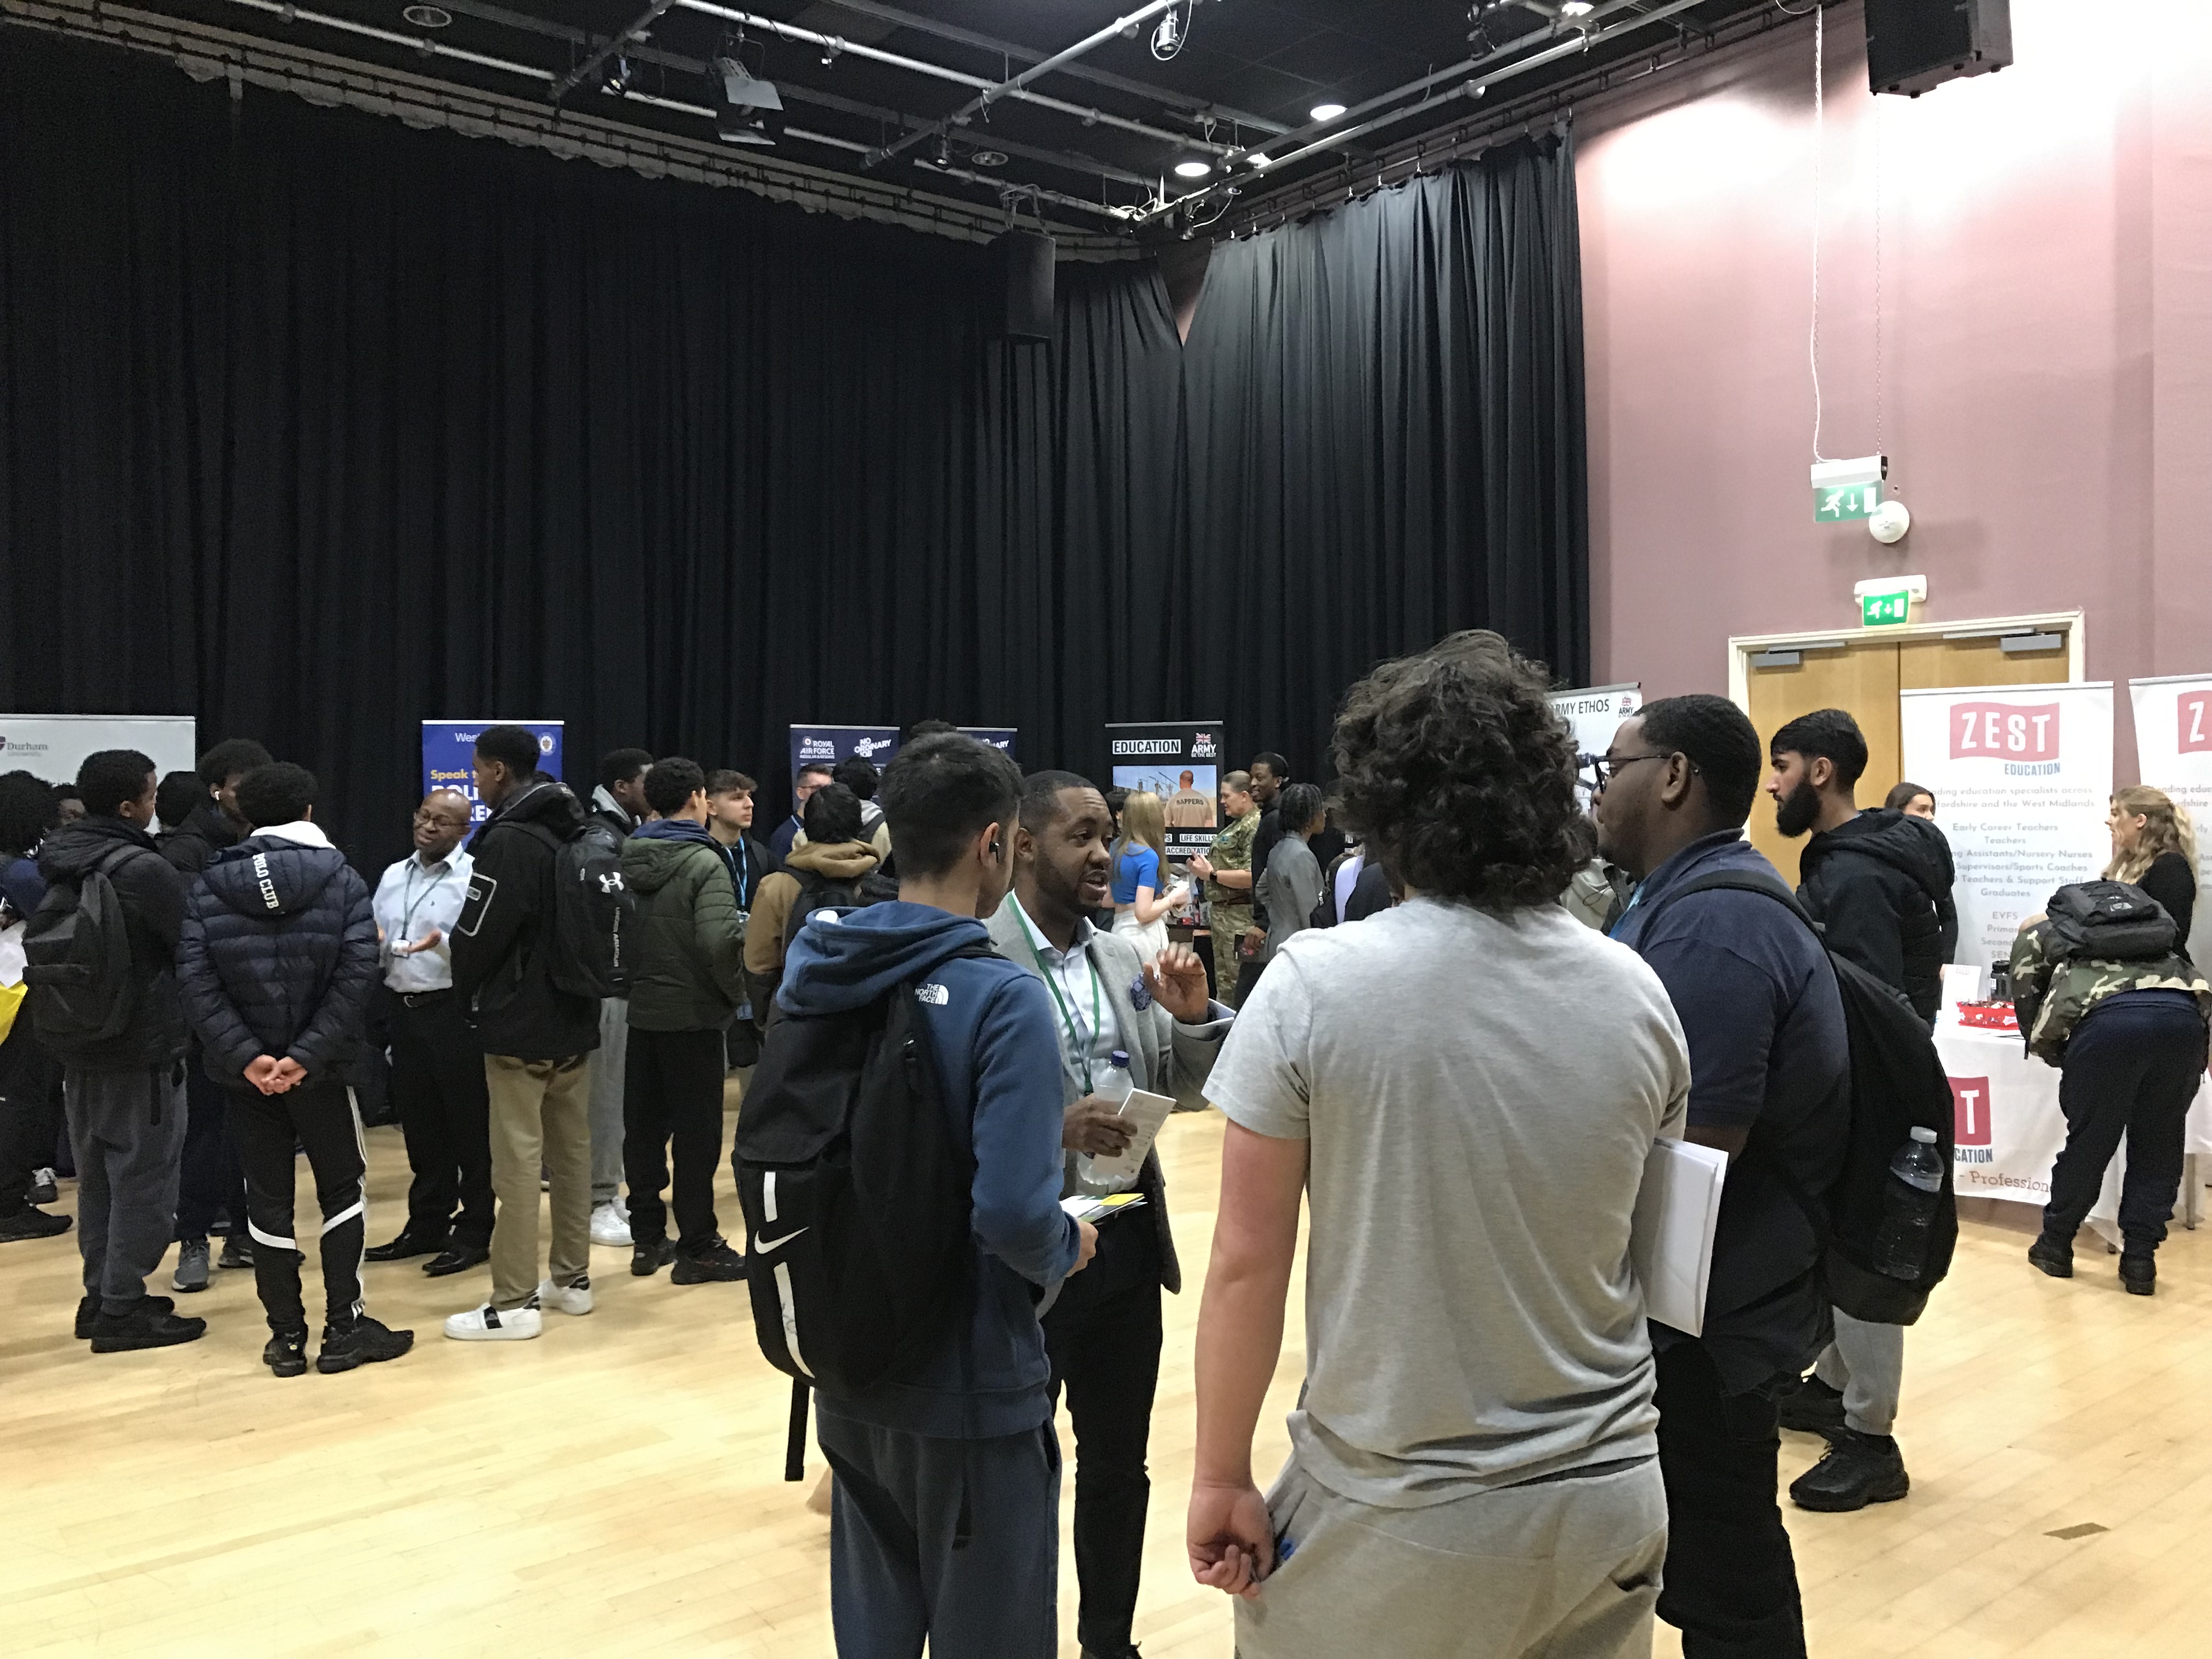 BMet and Reach Society Career event